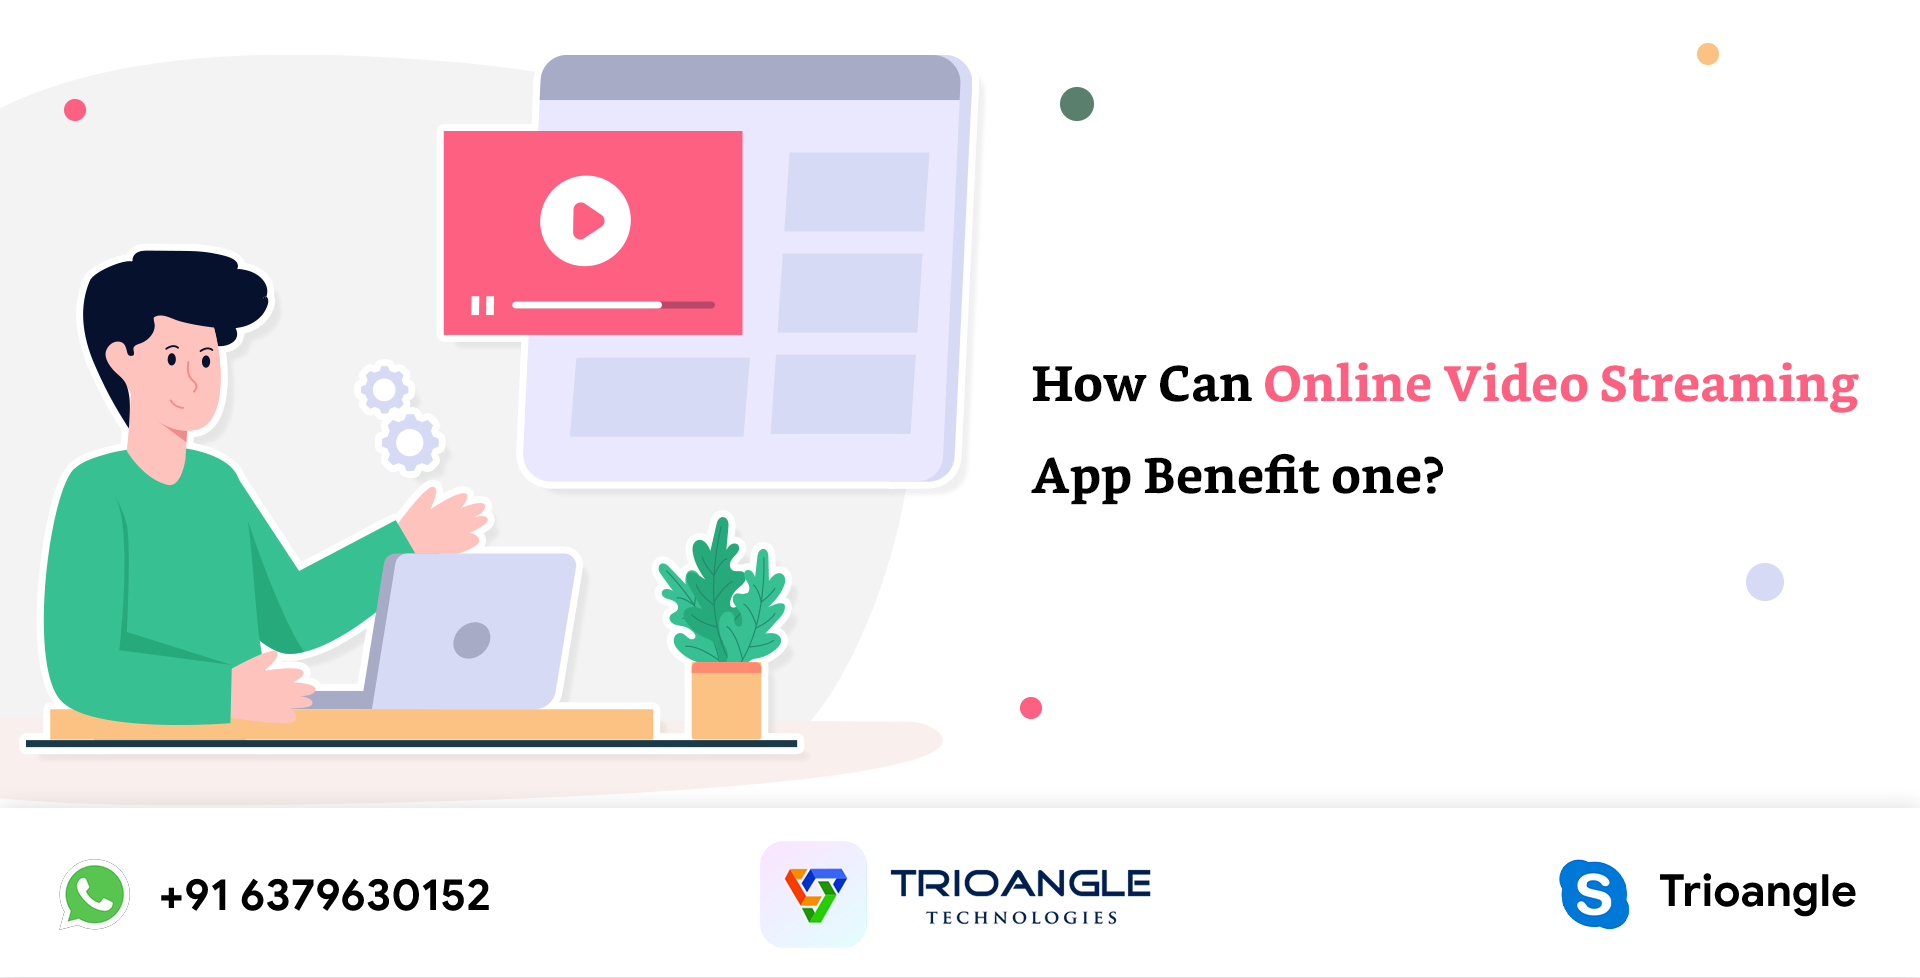 How Can Online Video Streaming App Benefit one?